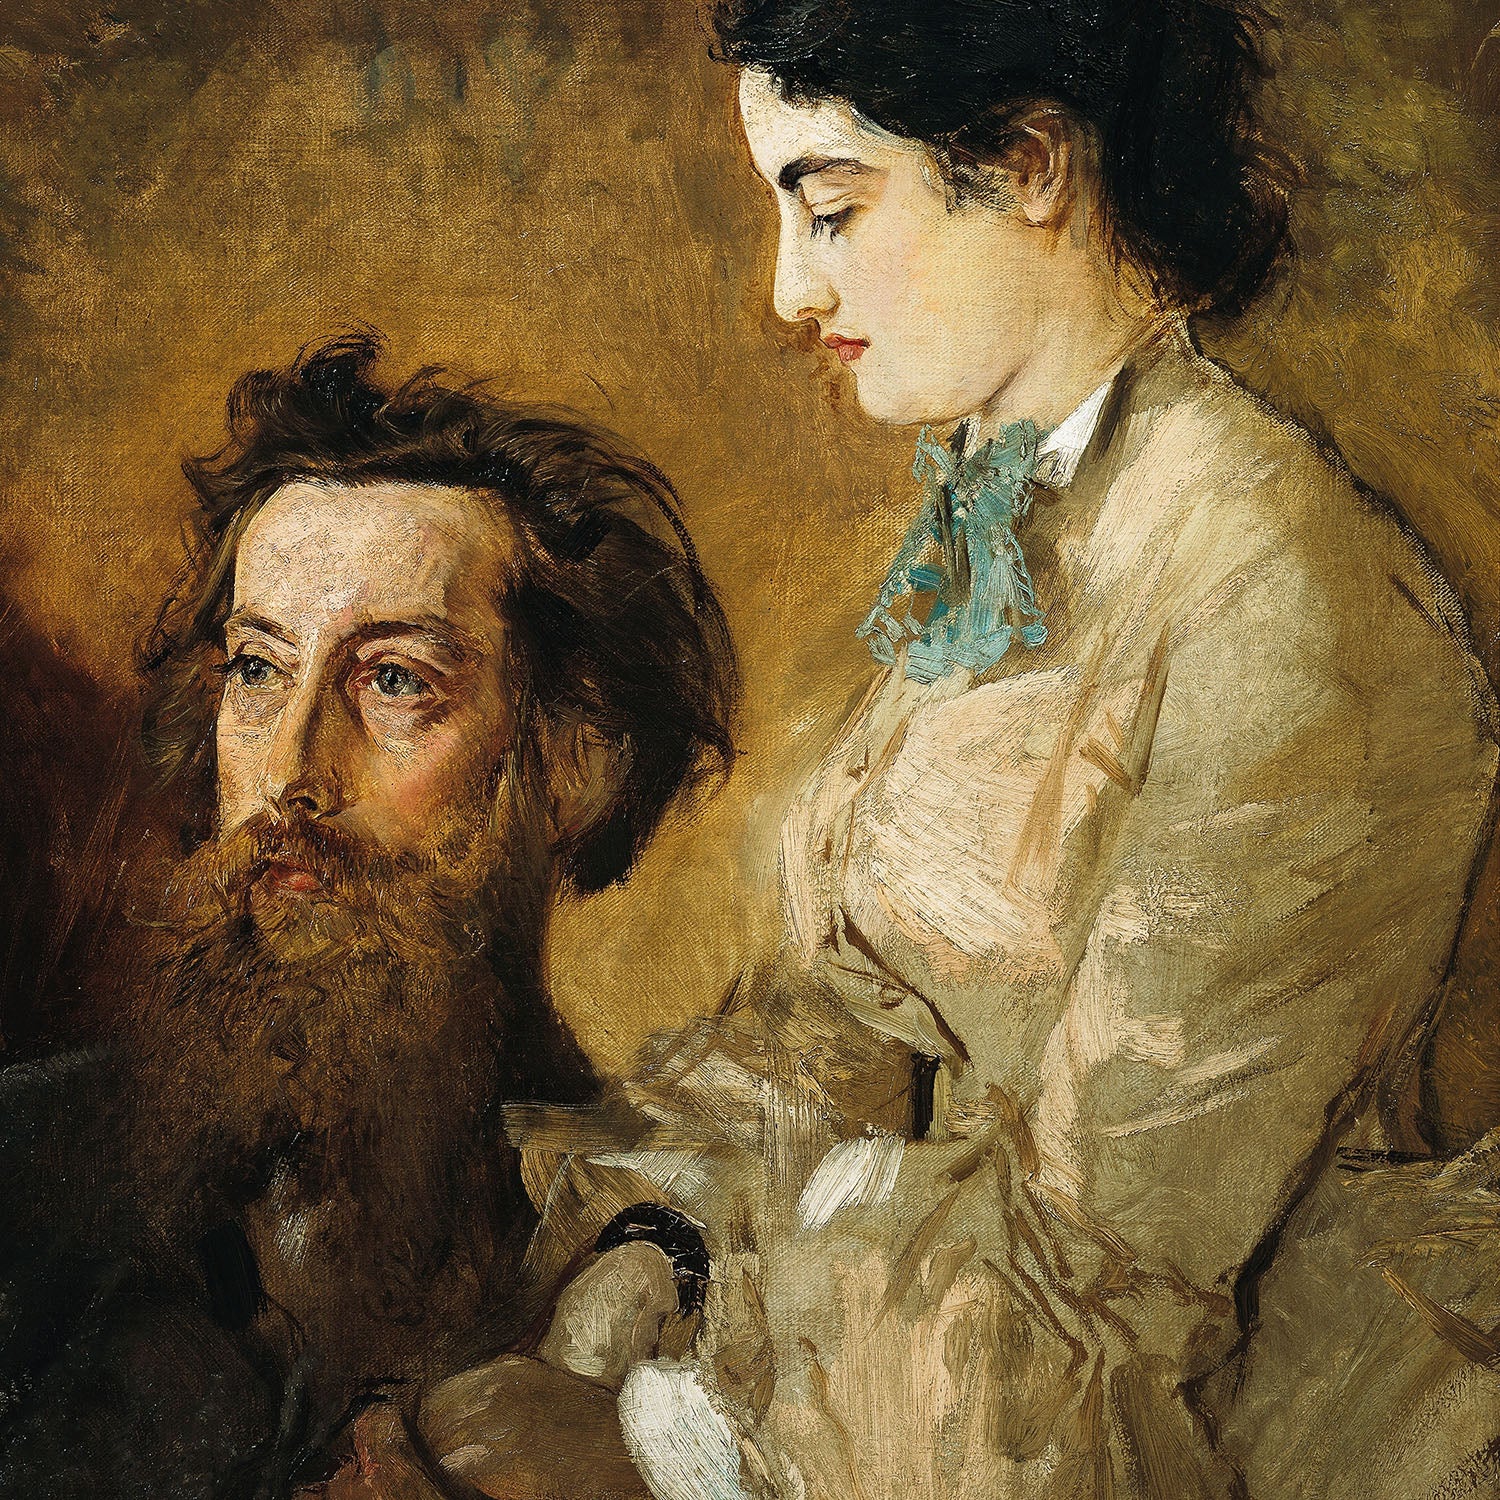 sculptor & his wife